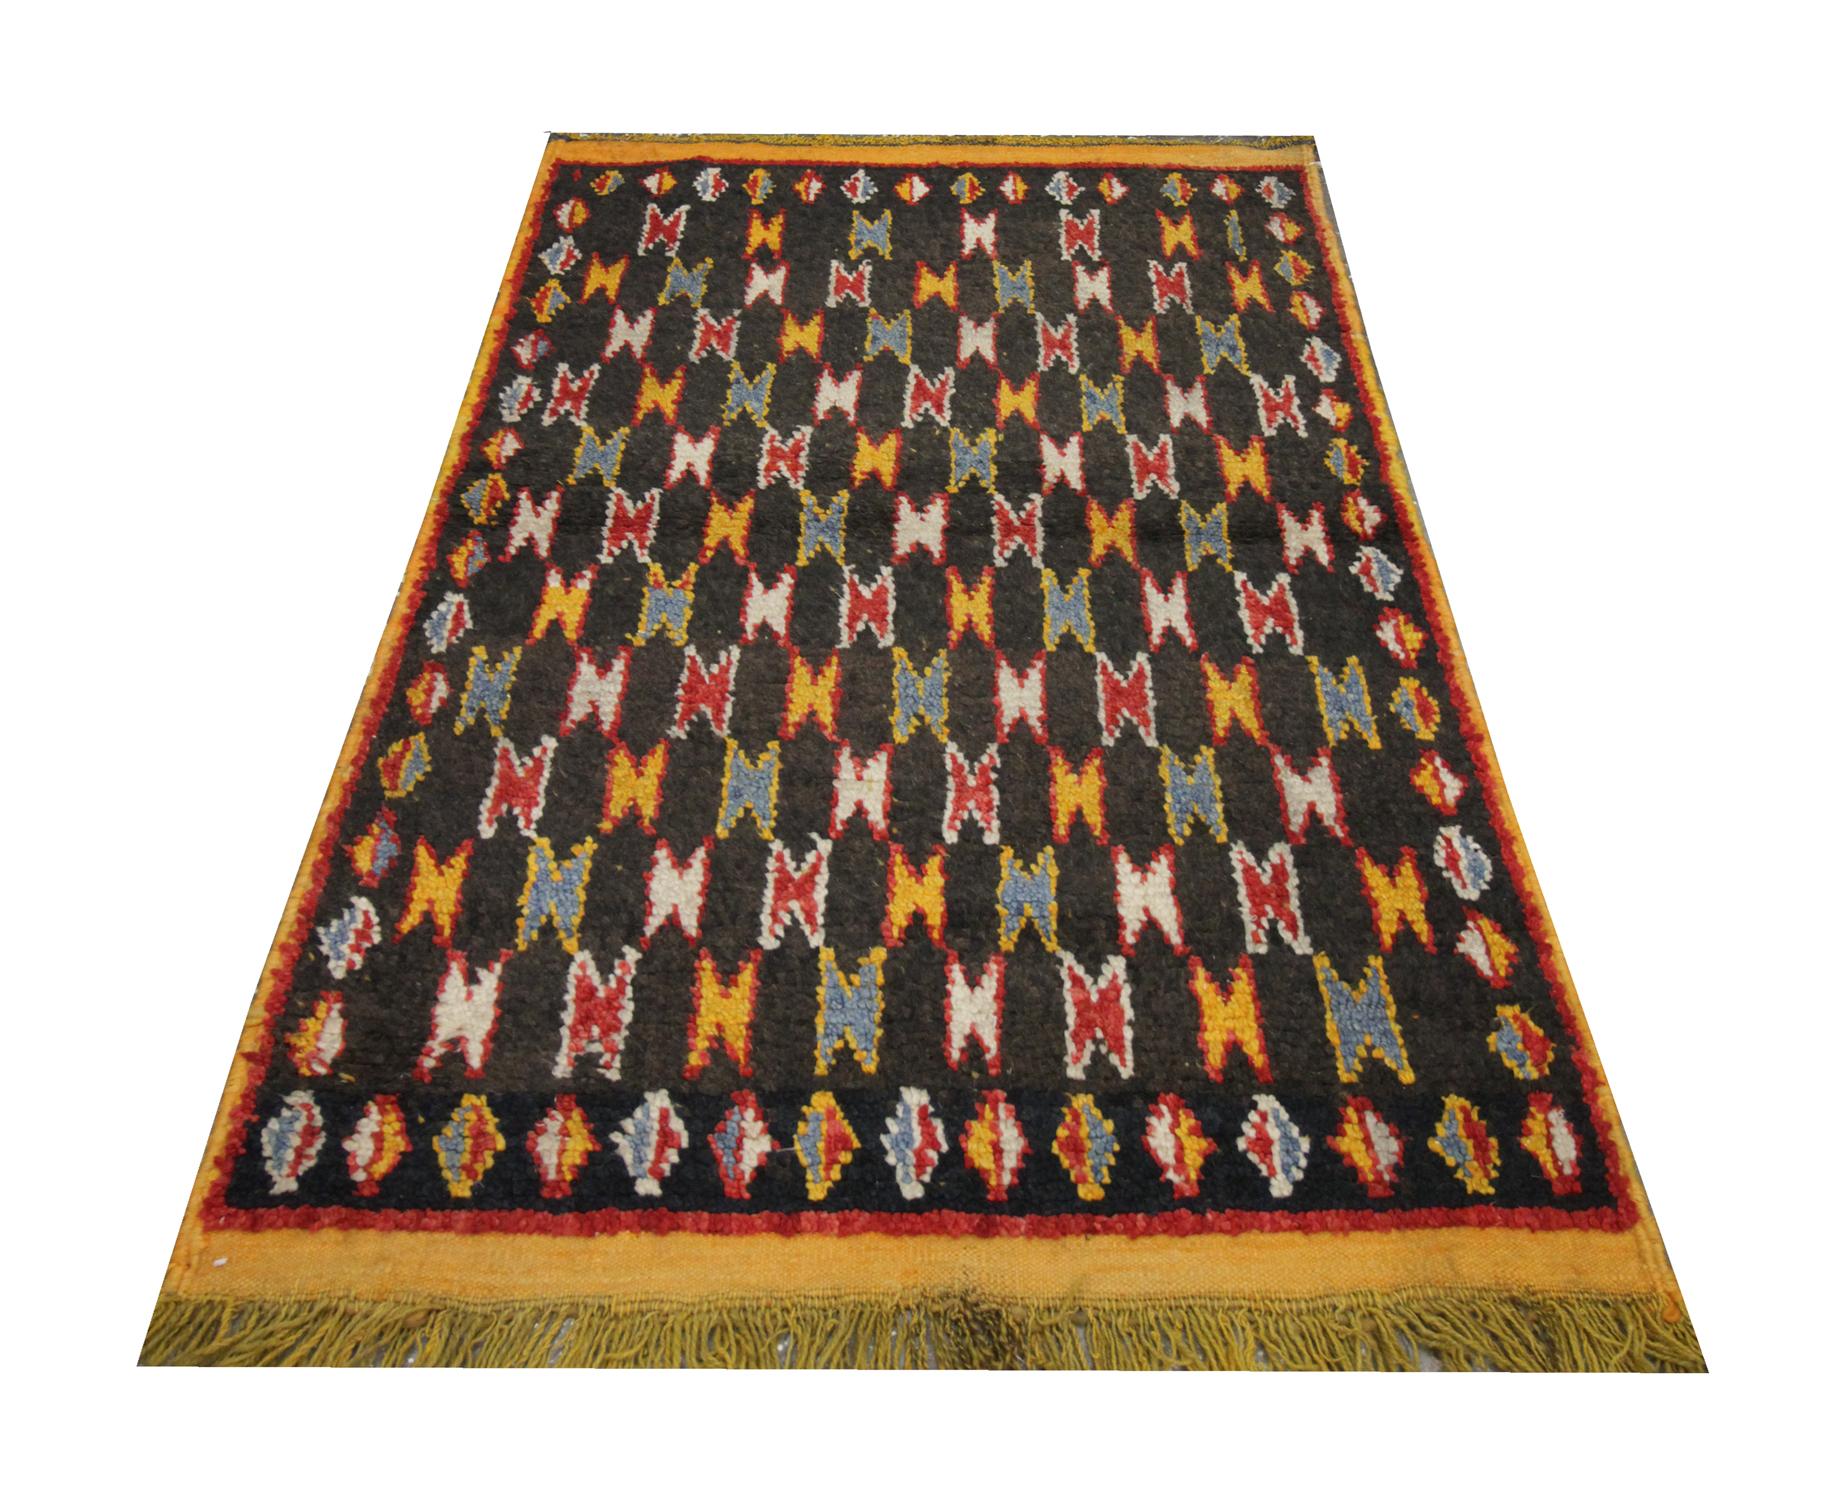 This fine wool rug was woven by hand in the 1960s with a geometric repeating all-over pattern. The colour palette is bold with yellow, red, ivory and blue accents. Paired with the simple geometric design, this piece is sure to make the perfect